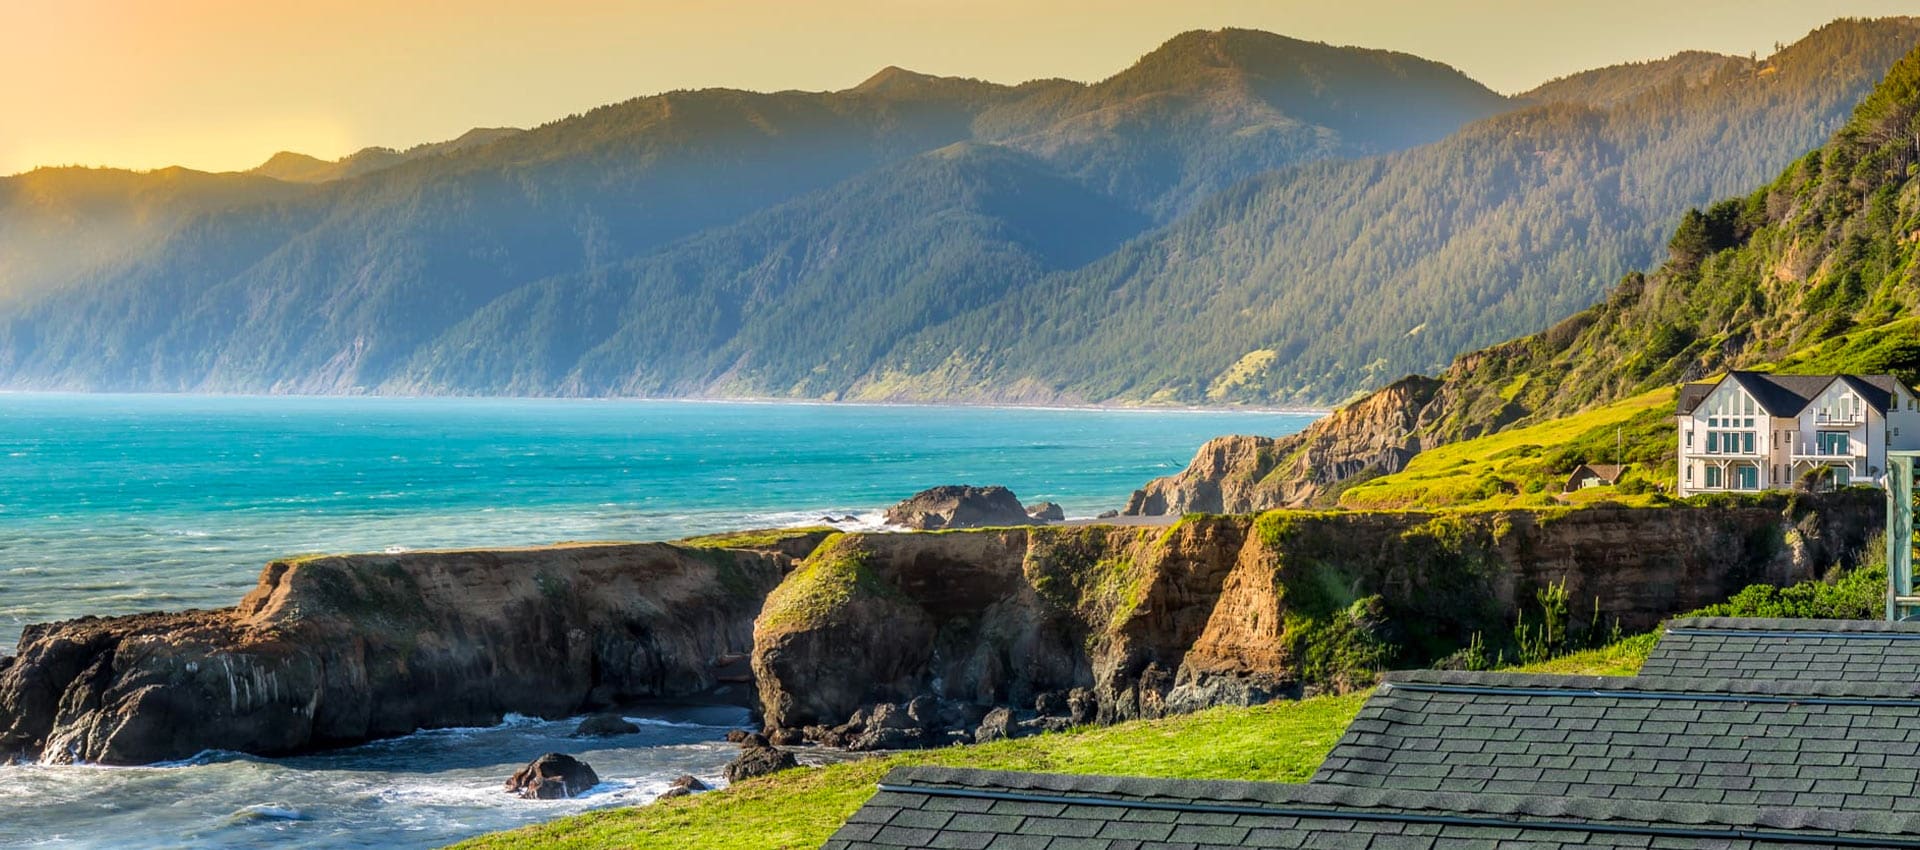 Accommodations on the Northern California Coast